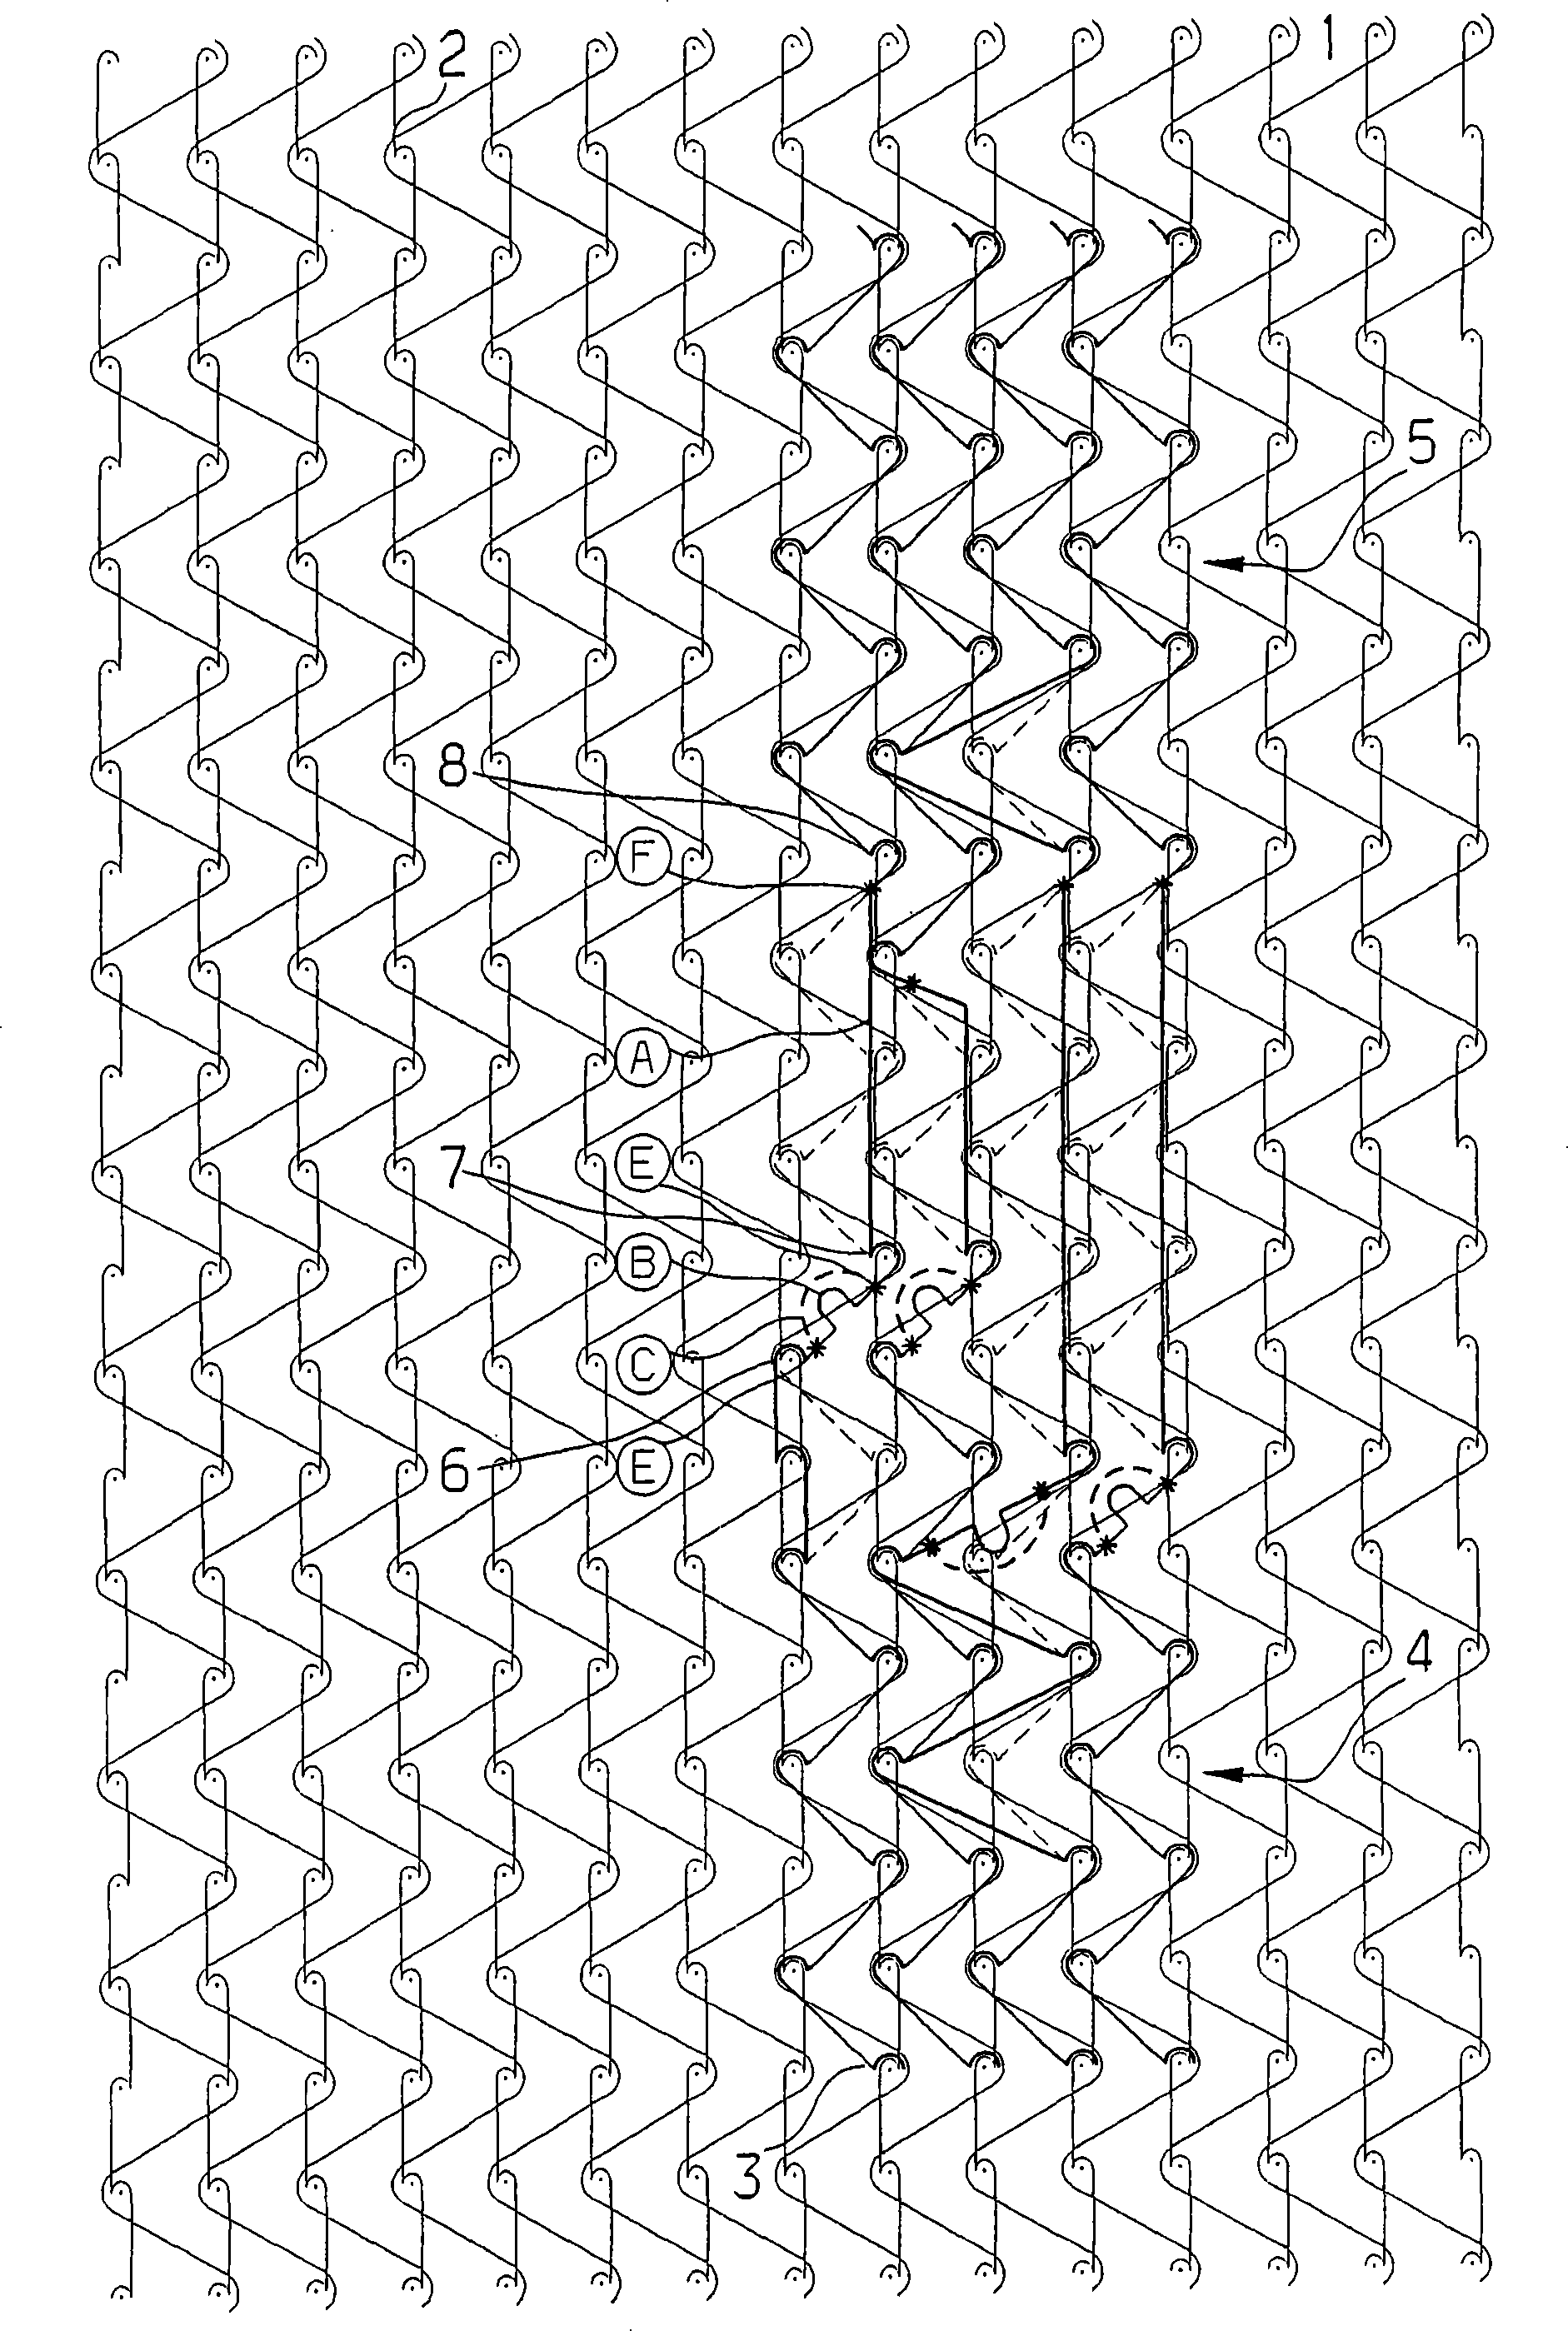 Method for manufacturing knitwear